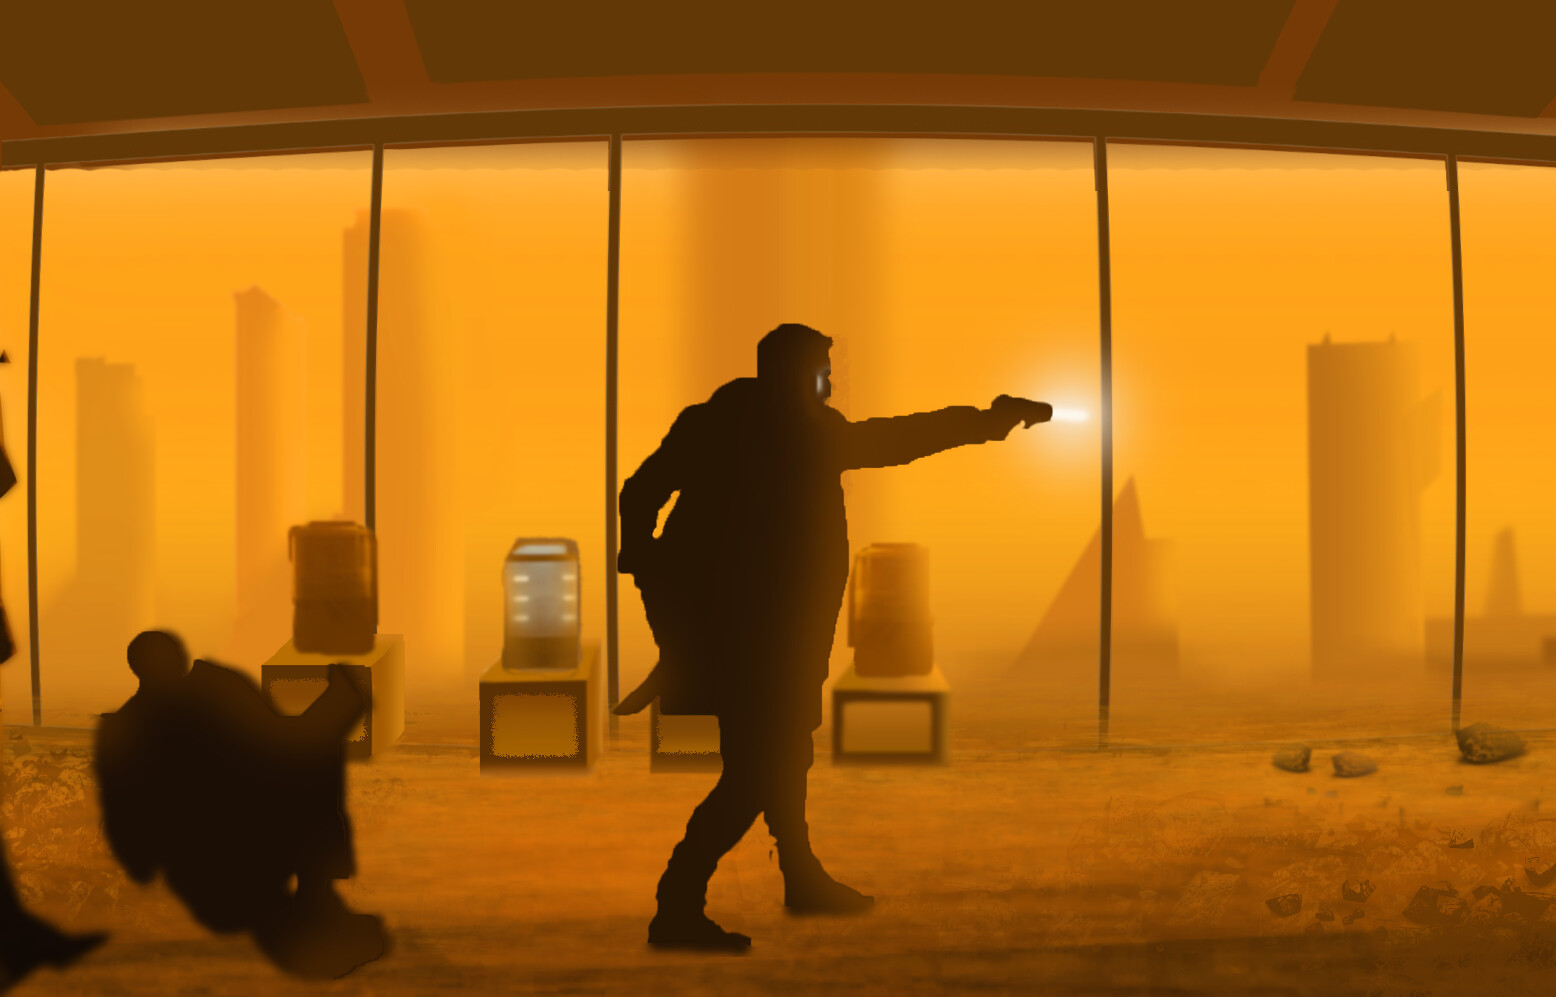 blade runner movie action still of a silhouetted